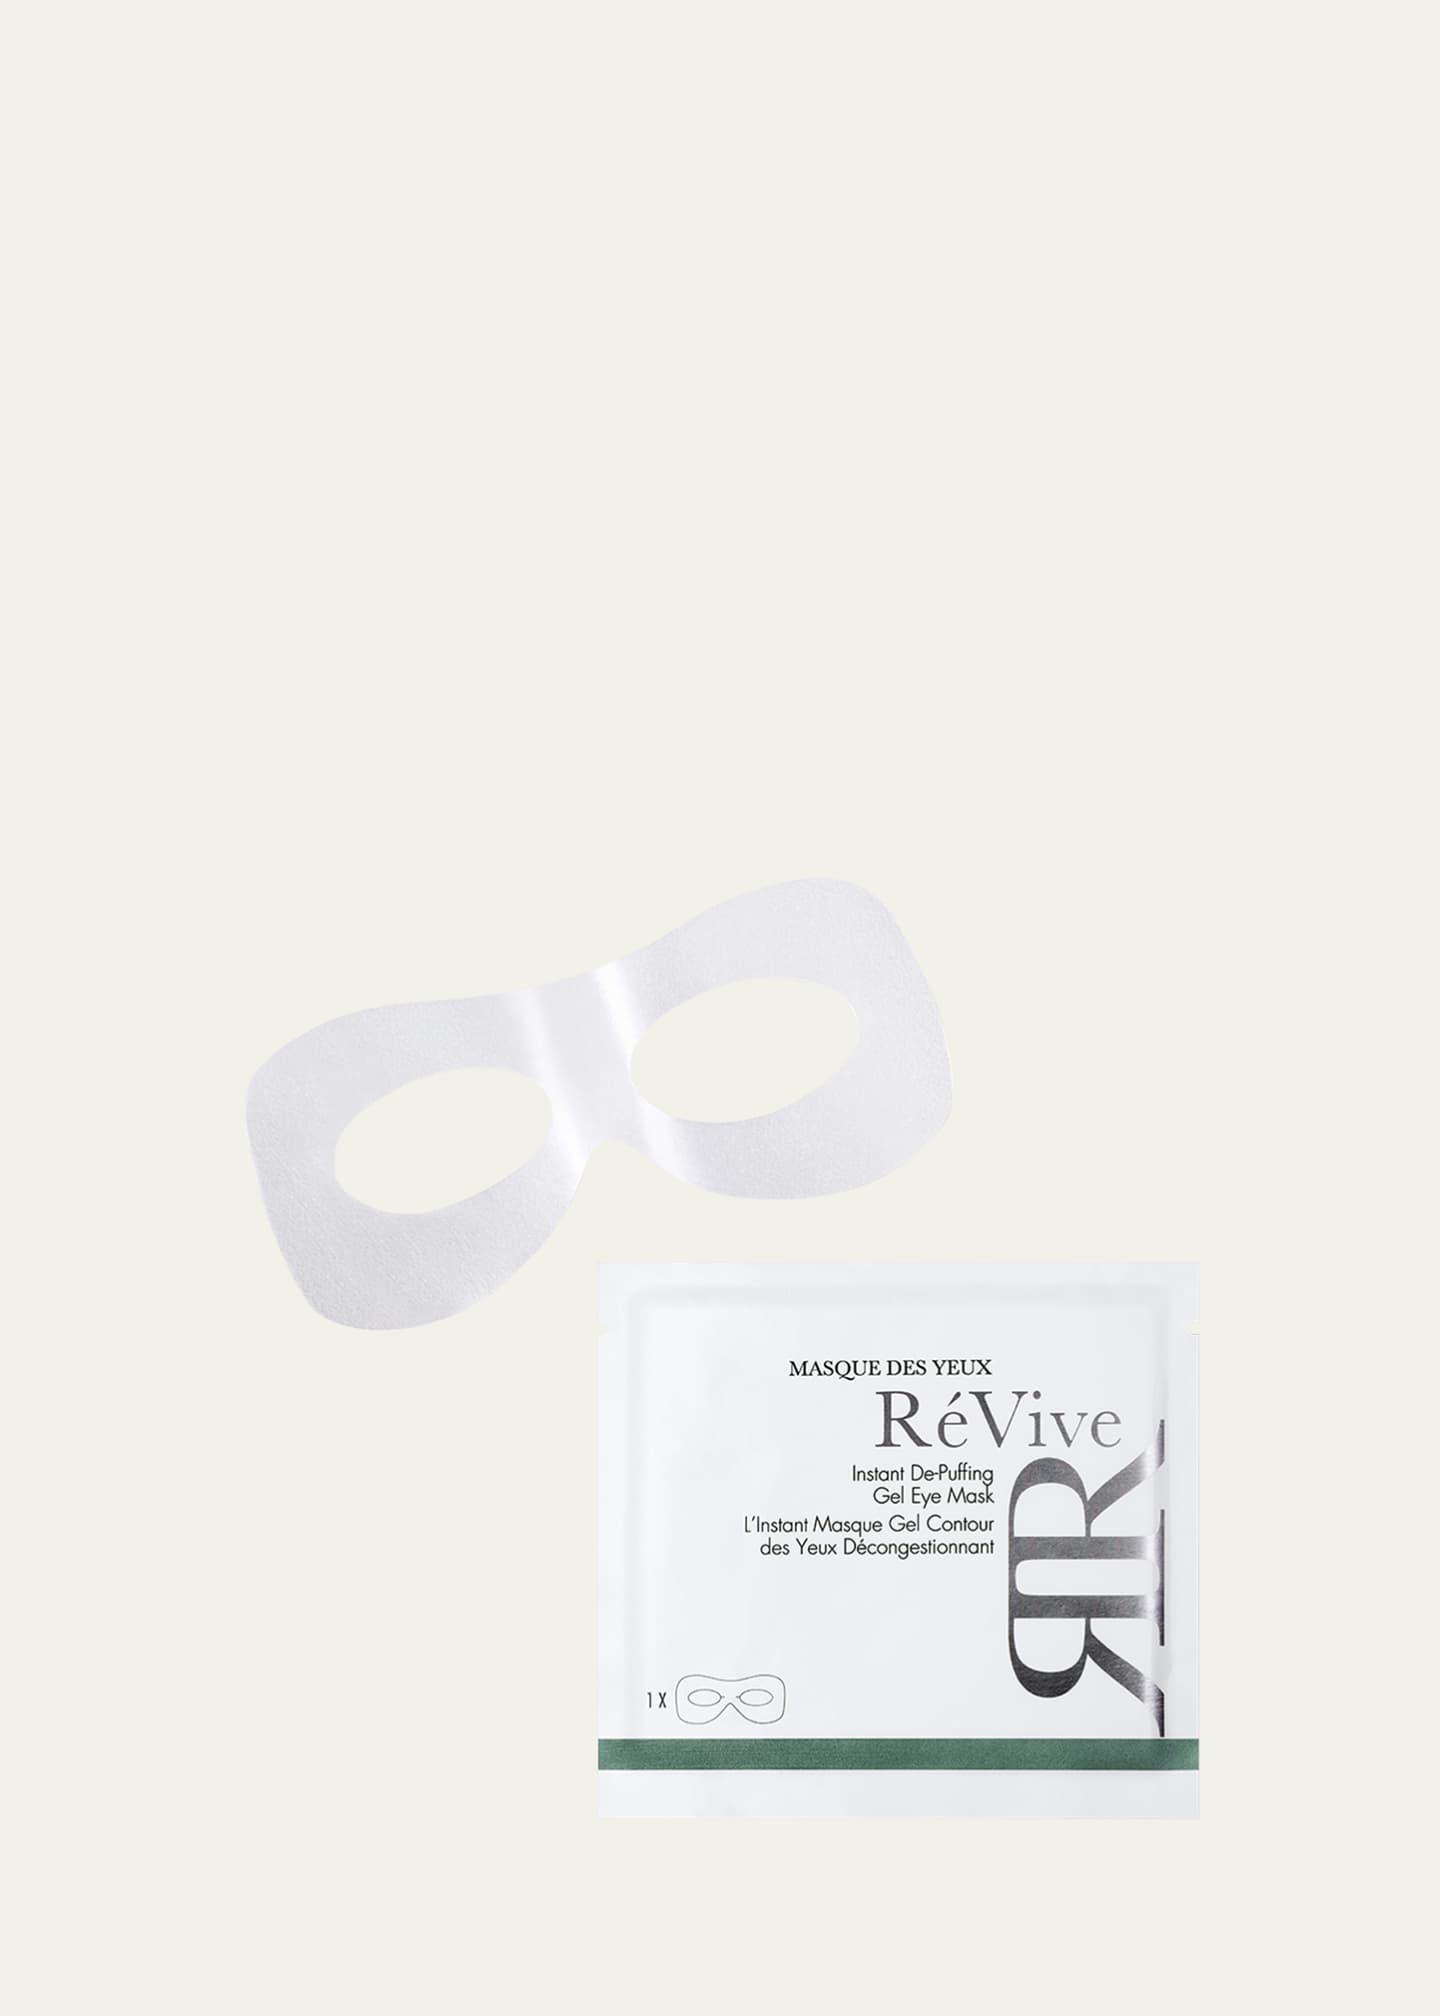 ReVive Masque Des Yeaux Instant De-Puffing Gel Eye Mask, 6 Pack Image 1 of 5